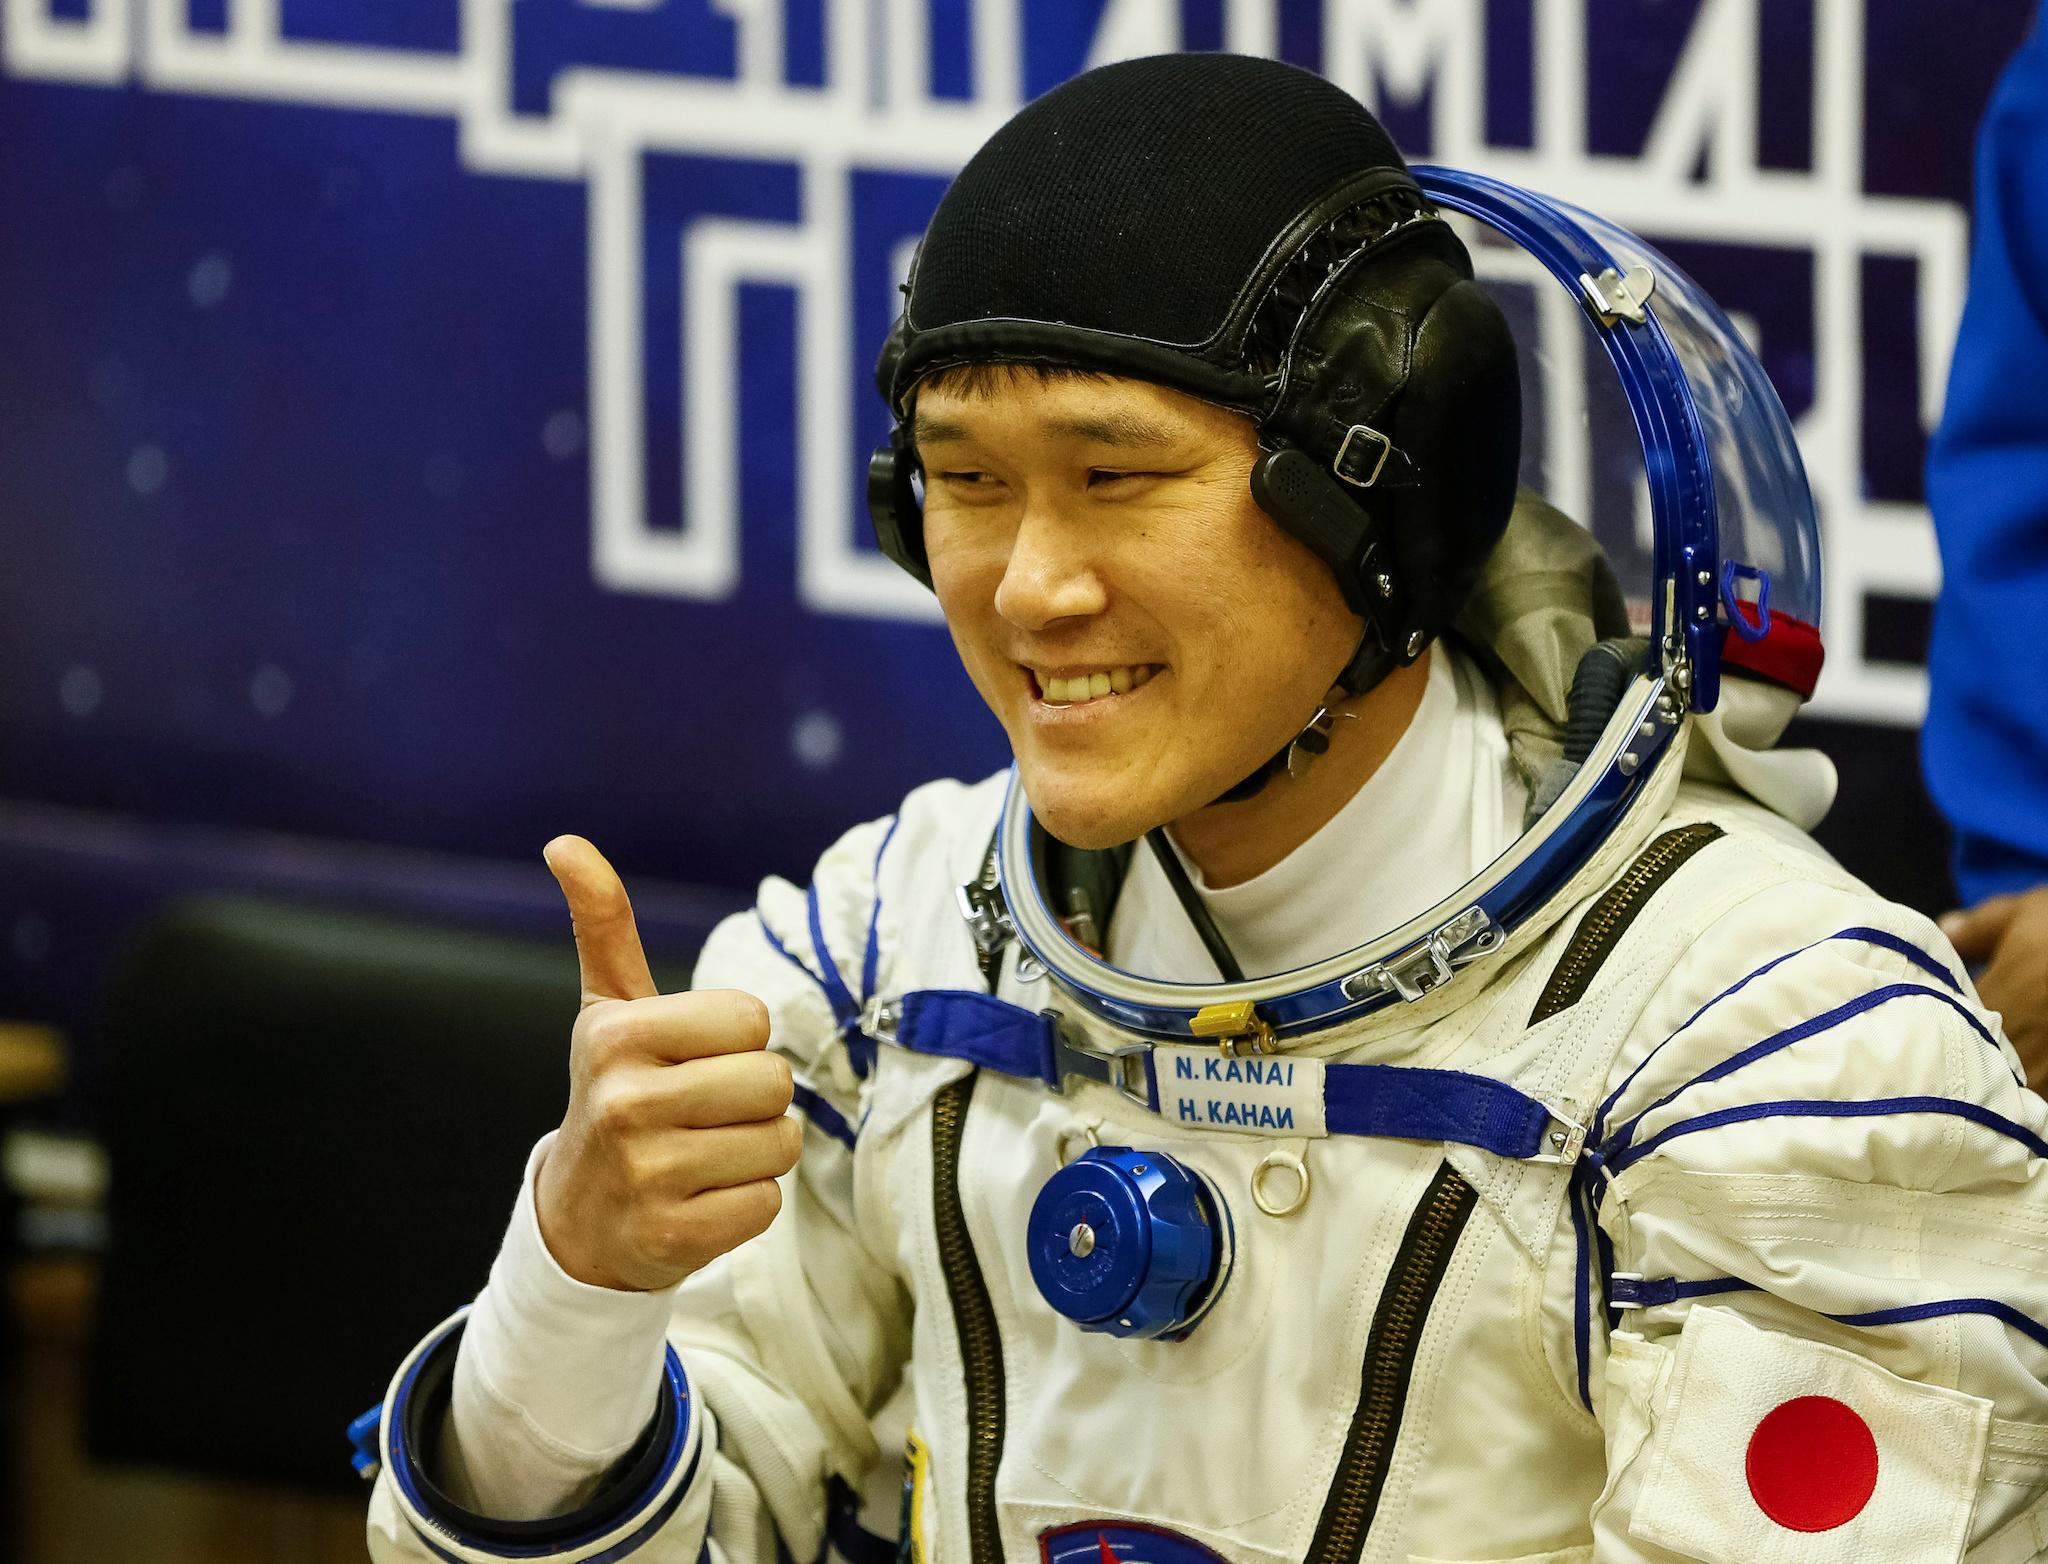 ISS crew member Norishige Kanai of Japan waves during his space suit check